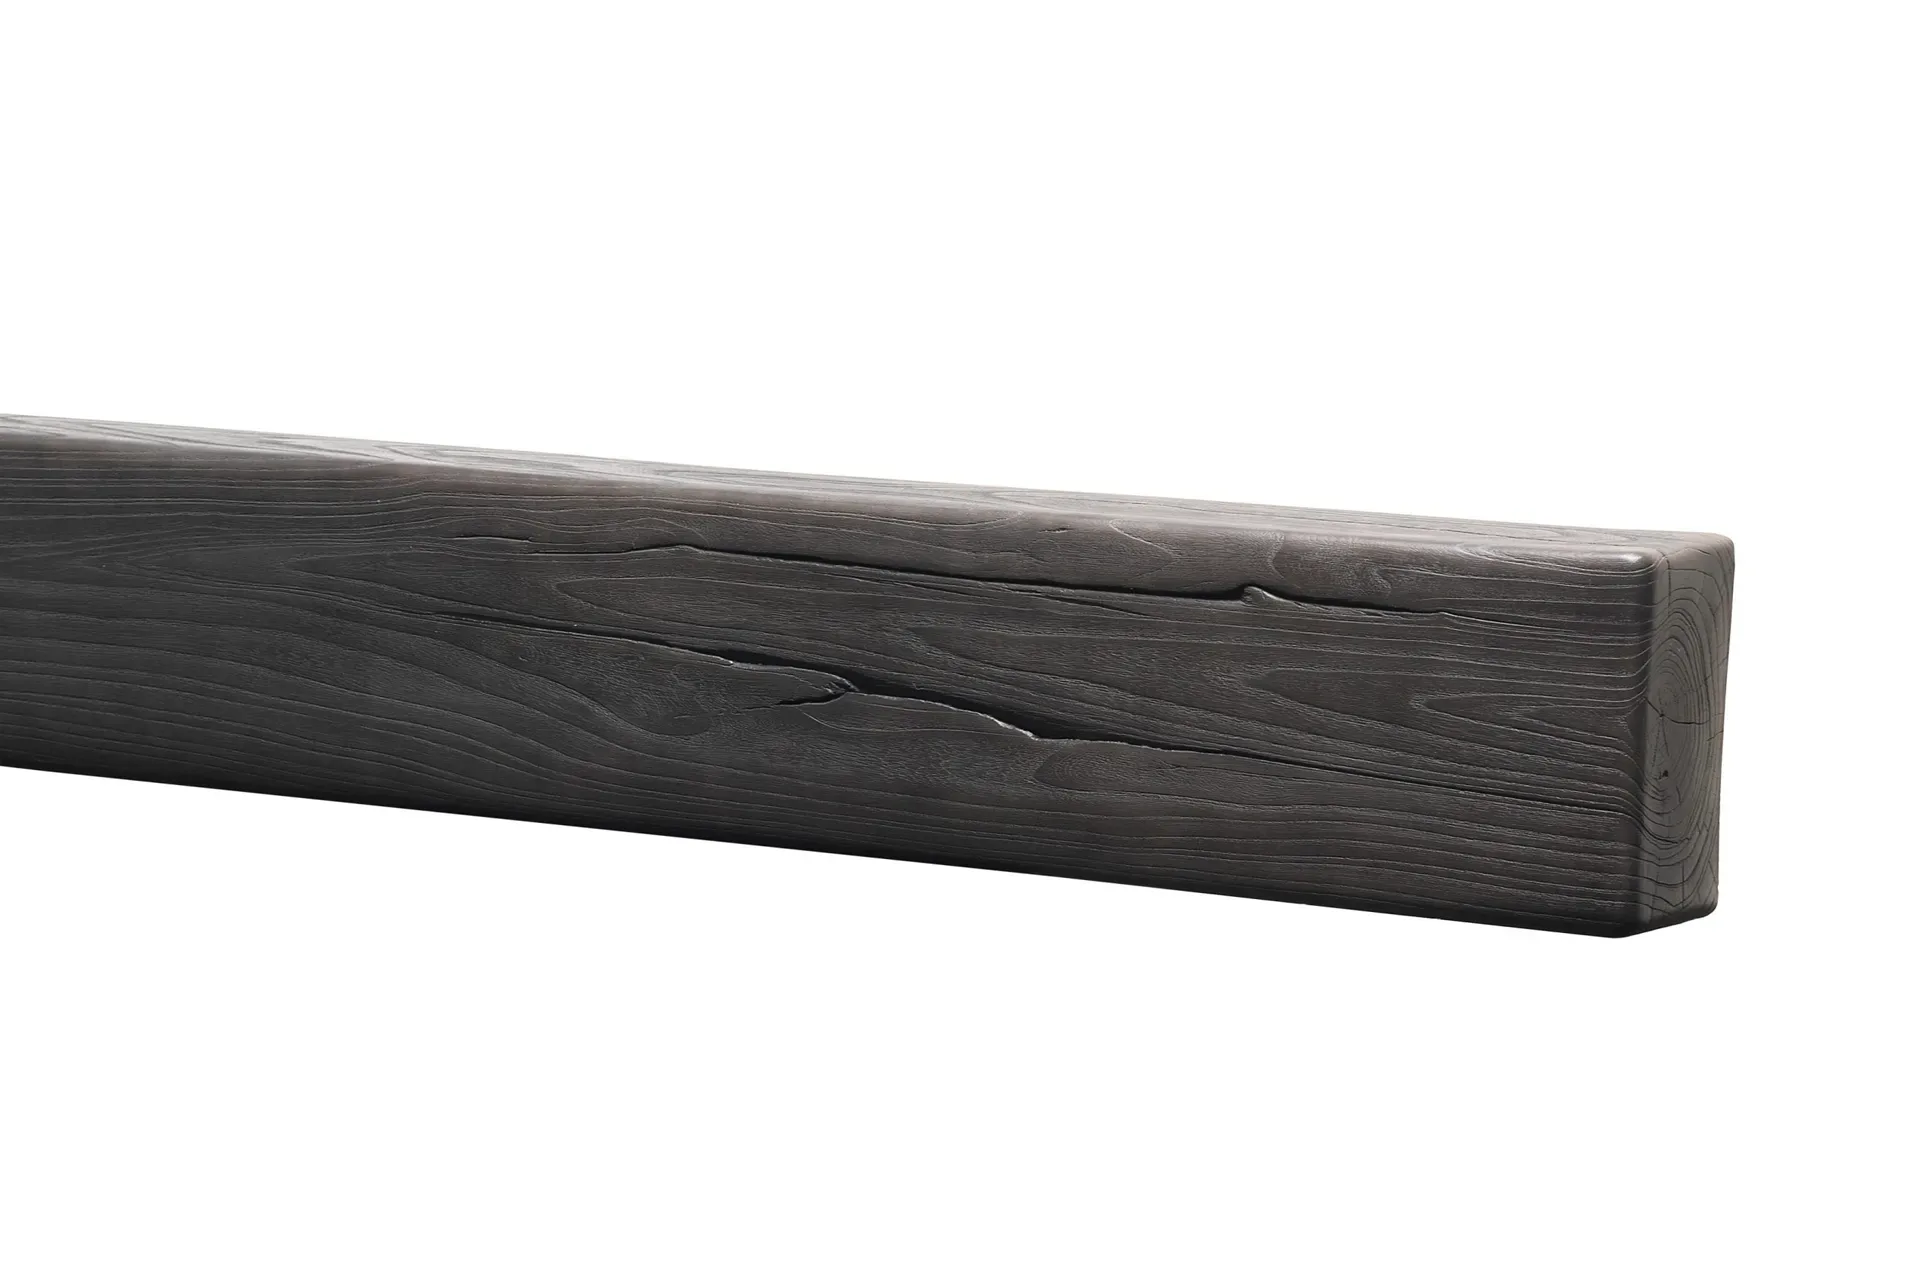 The gallery collection fireplace beam grey oak